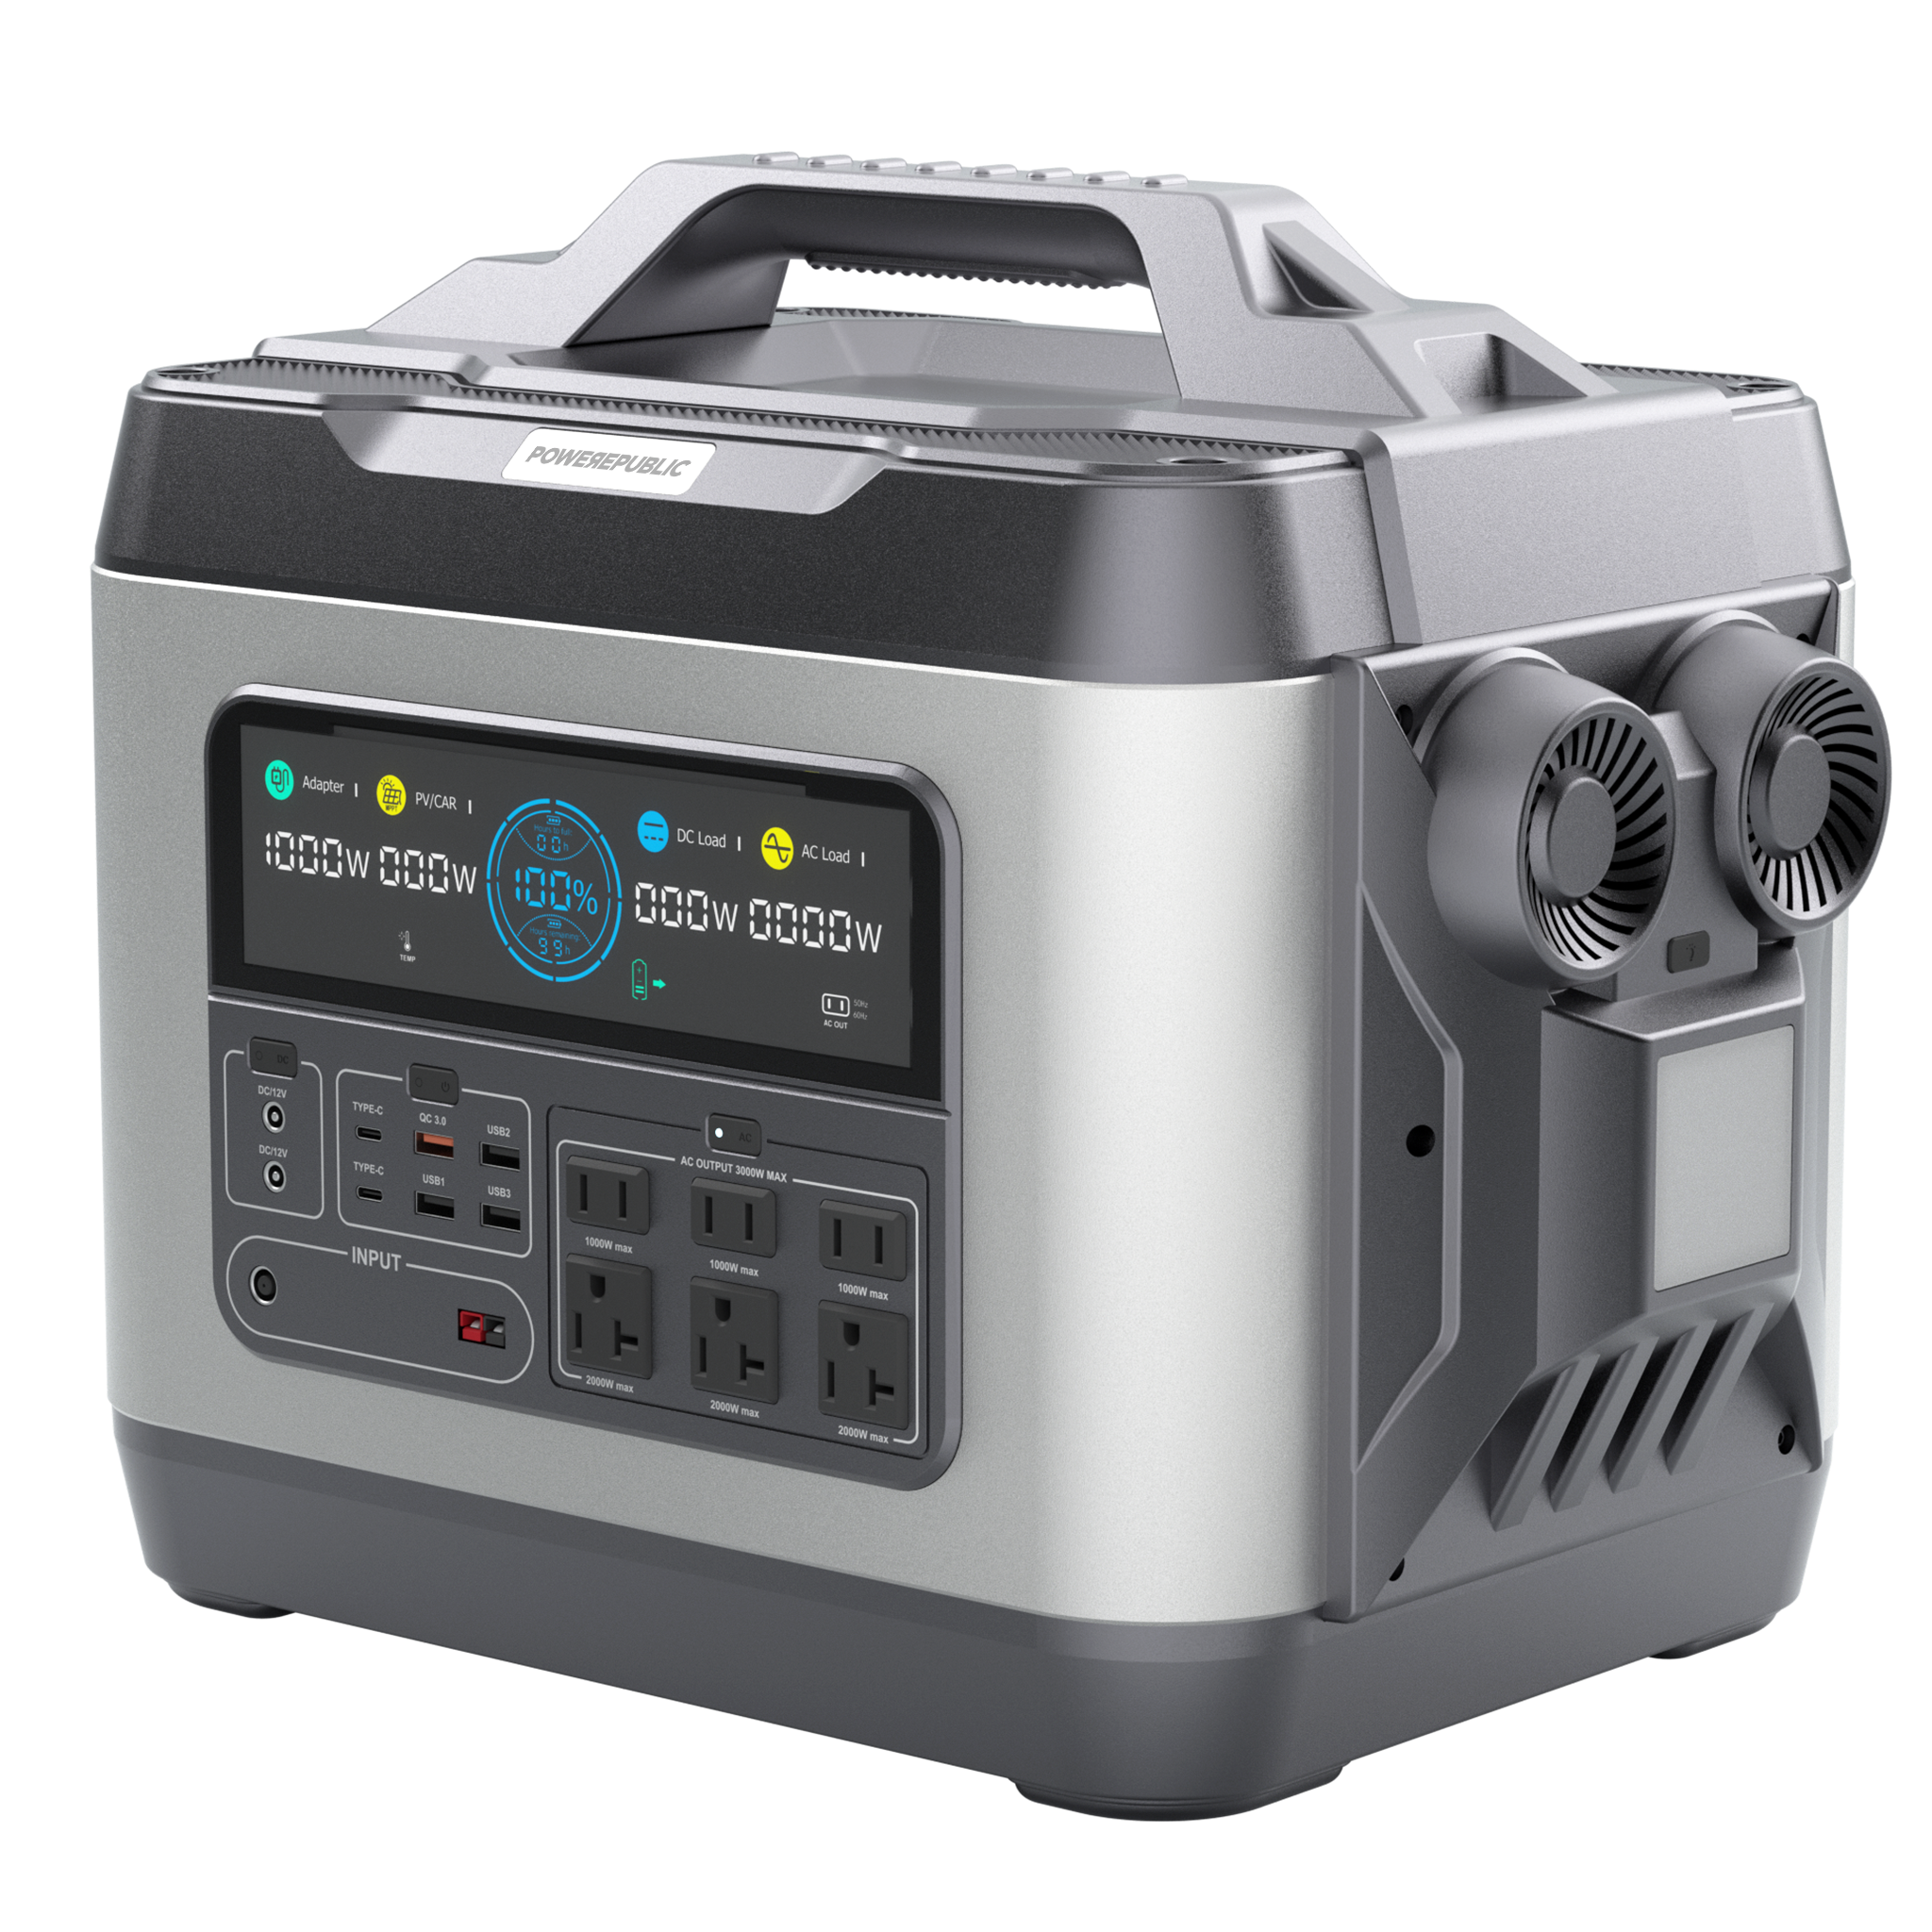 POWEREPUBLIC T3000 portable power station, 3000W 3200Wh, metallic gray aluminum-alloy body with turbine-engine design, an LED Light, a handle, an LCD screen, and input and output ports.